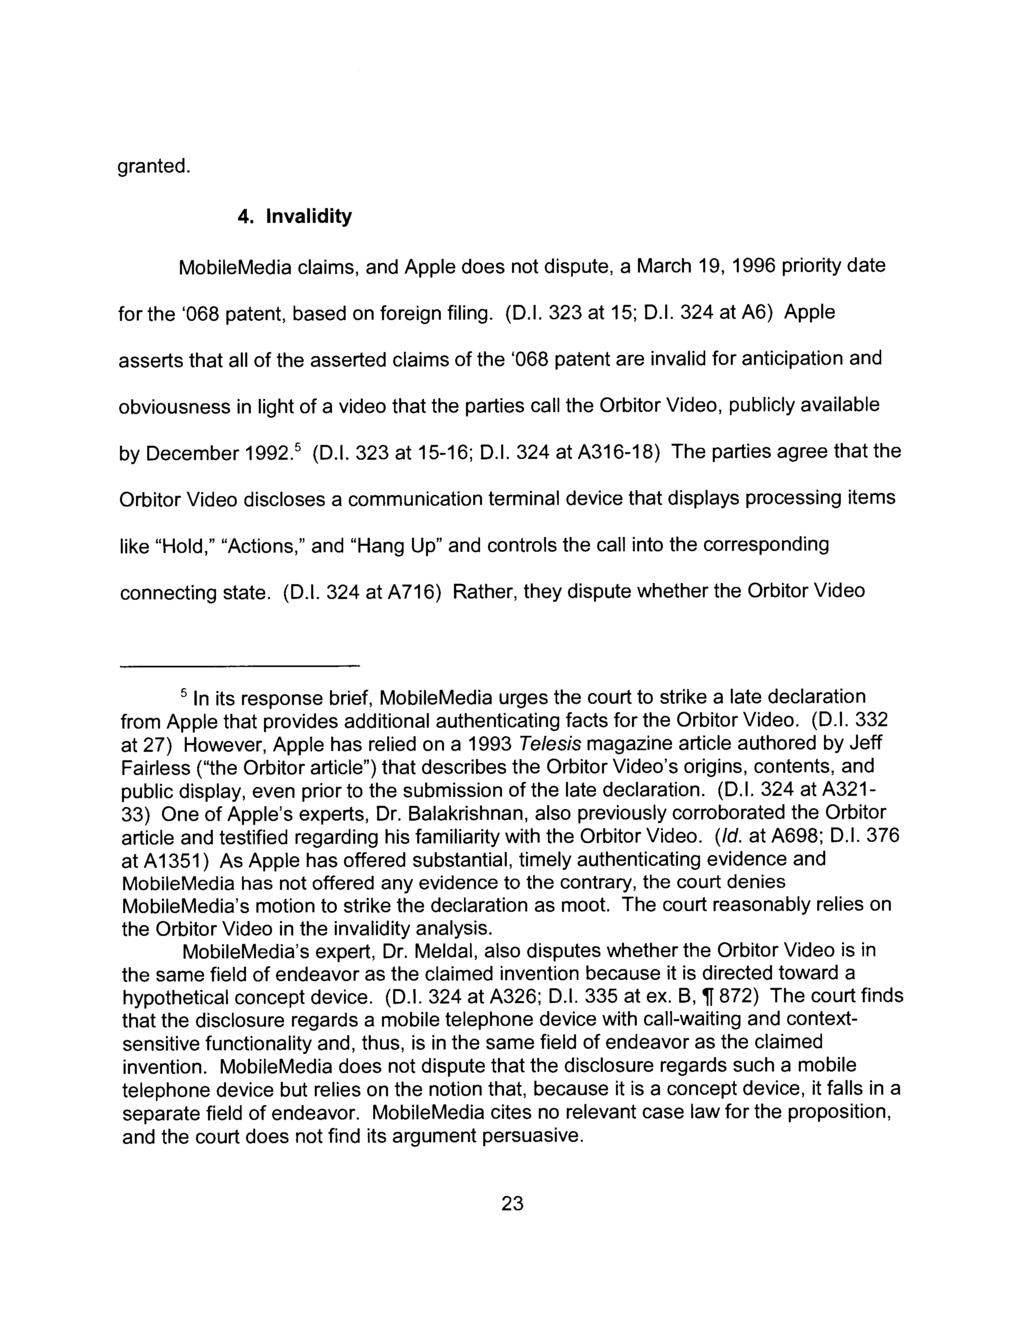 Case 1:10-cv-00258-SLR Document 461 Filed 11/08/12 Page 24 of 103 PageID #: 8998 granted. 4. Invalidity MobileMedia claims, and Apple does not dispute, a March 19, 1996 priority date for the '068 patent, based on foreign filing.